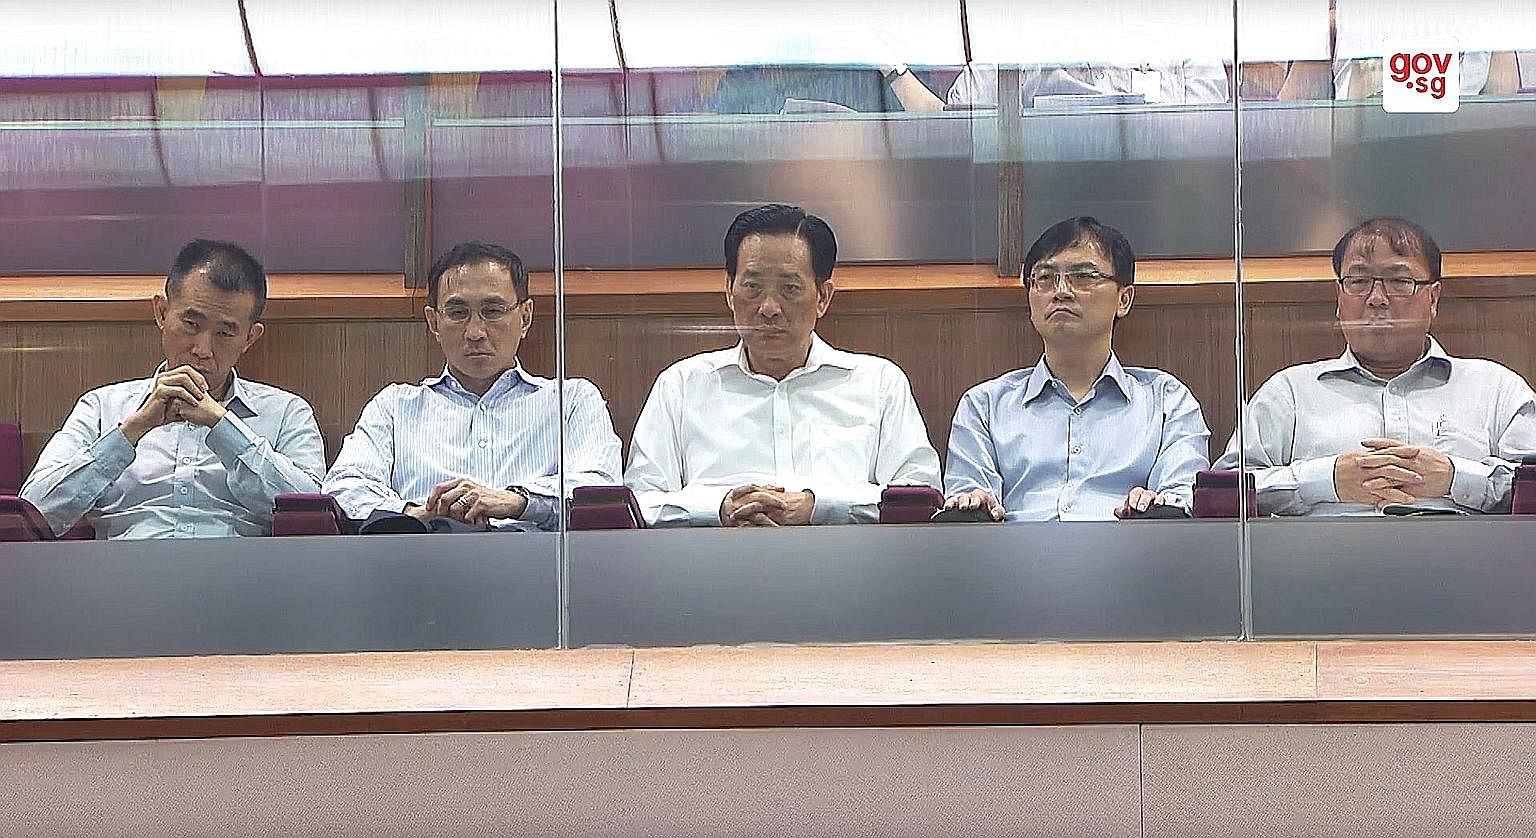 Present in Parliament yesterday were (from left) SMRT Trains chief executive Lee Ling Wee, SMRT chief executive Desmond Kuek, SMRT chairman Seah Moon Ming, LTA chief executive Ngien Hoon Ping and LTA deputy chief executive Chua Chong Kheng. Transport